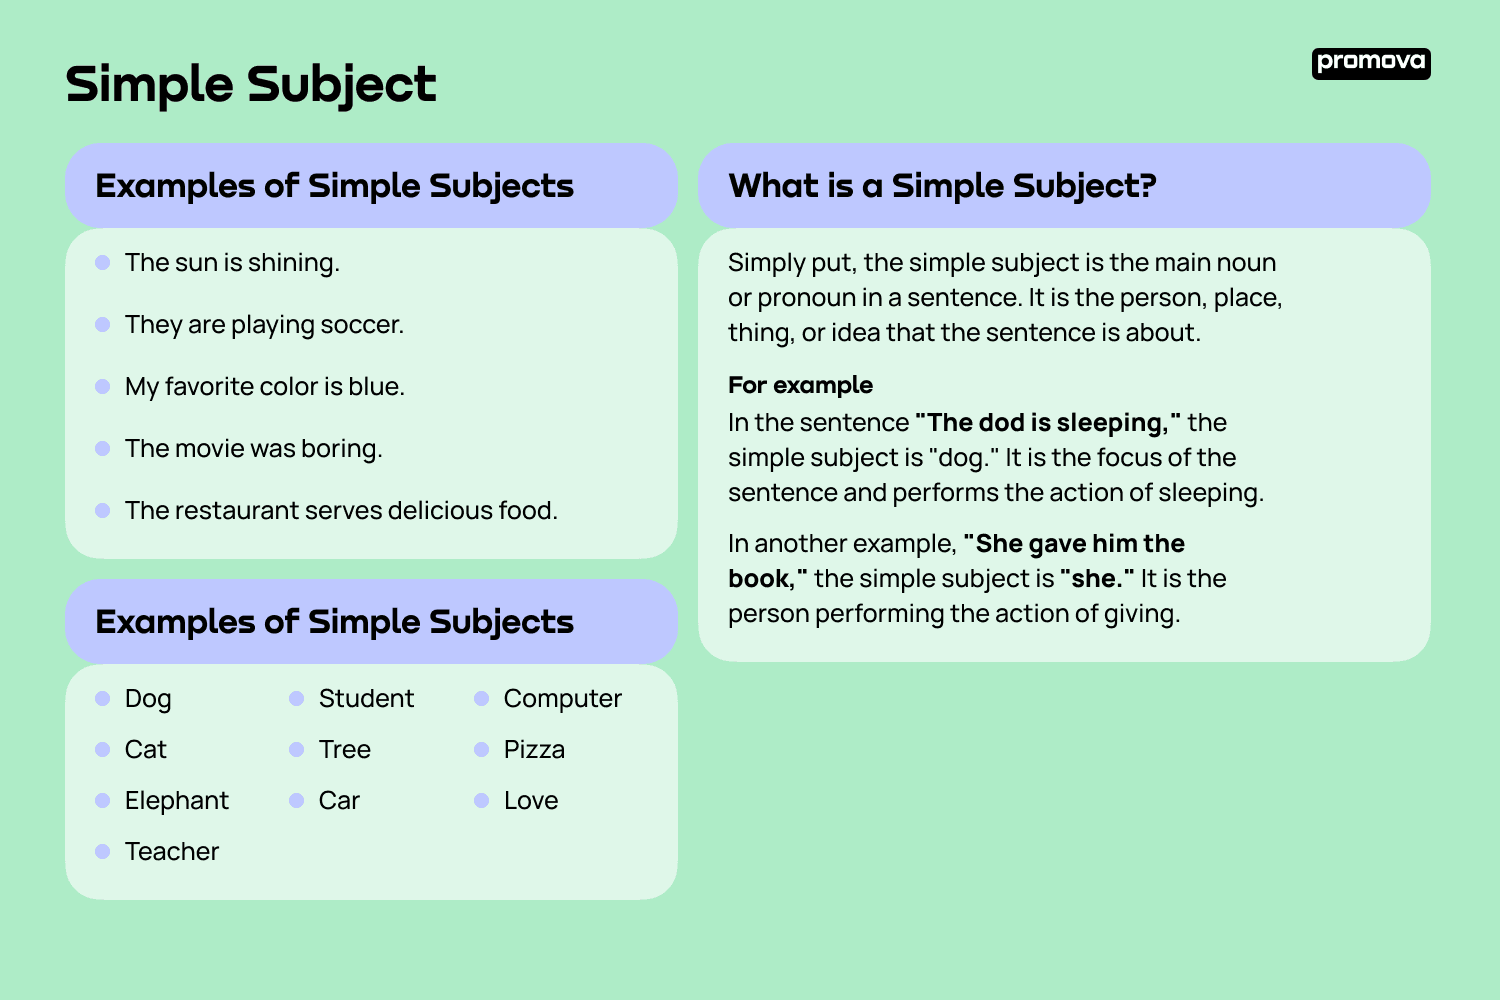 Examples of Simple Subjects